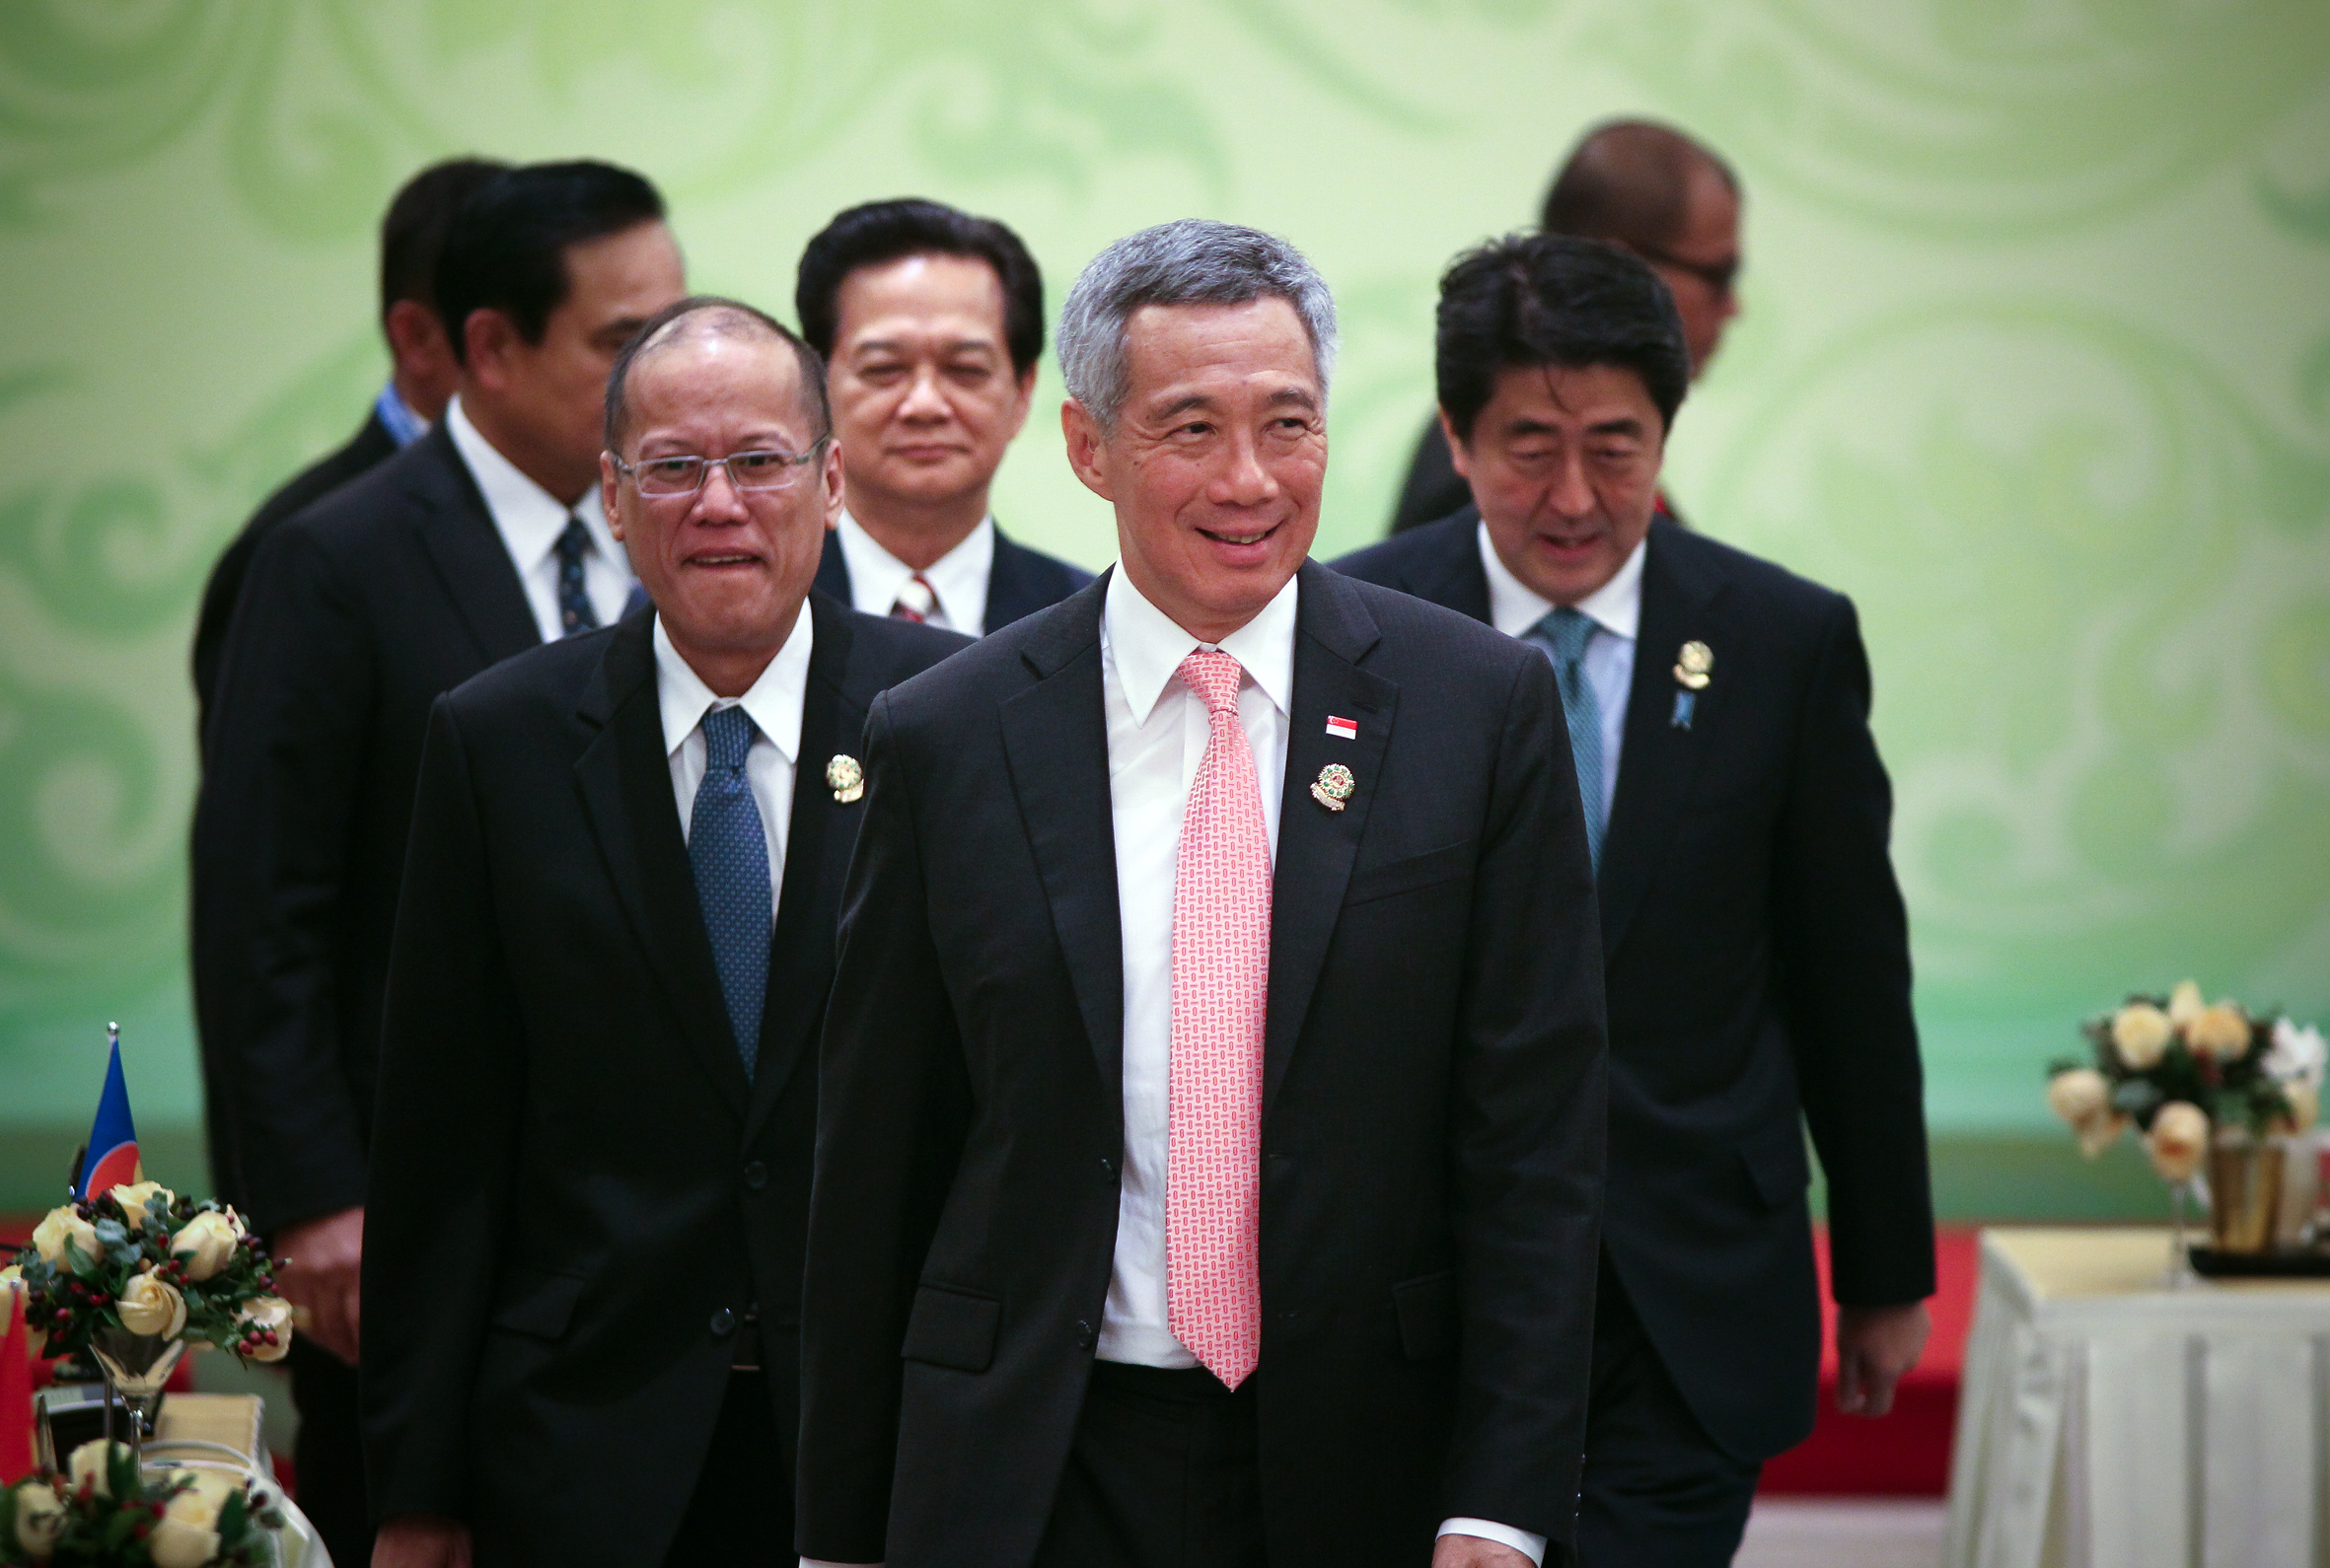 Prime Minister Lee Hsien Loong at the 25th ASEAN Summit in Nay Pyi Taw, Myanmar from 12 to 13 Nov 2014 (Zaobao Photos © Singapore Press Holdings Limited)